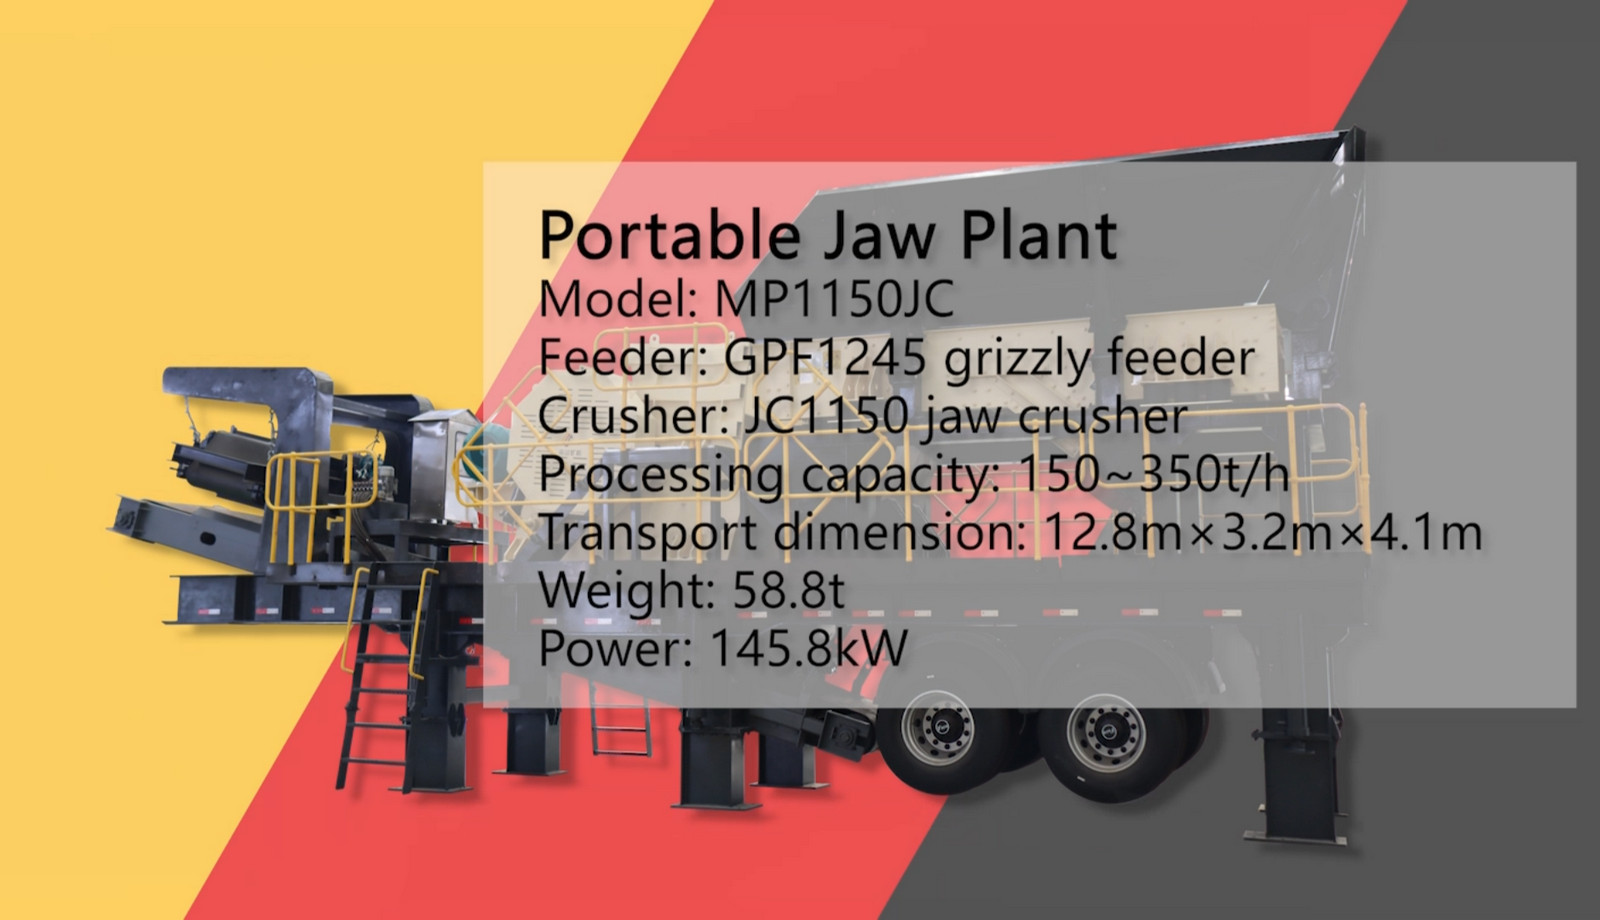 Introduction of MP1150JC Portable Jaw Plant